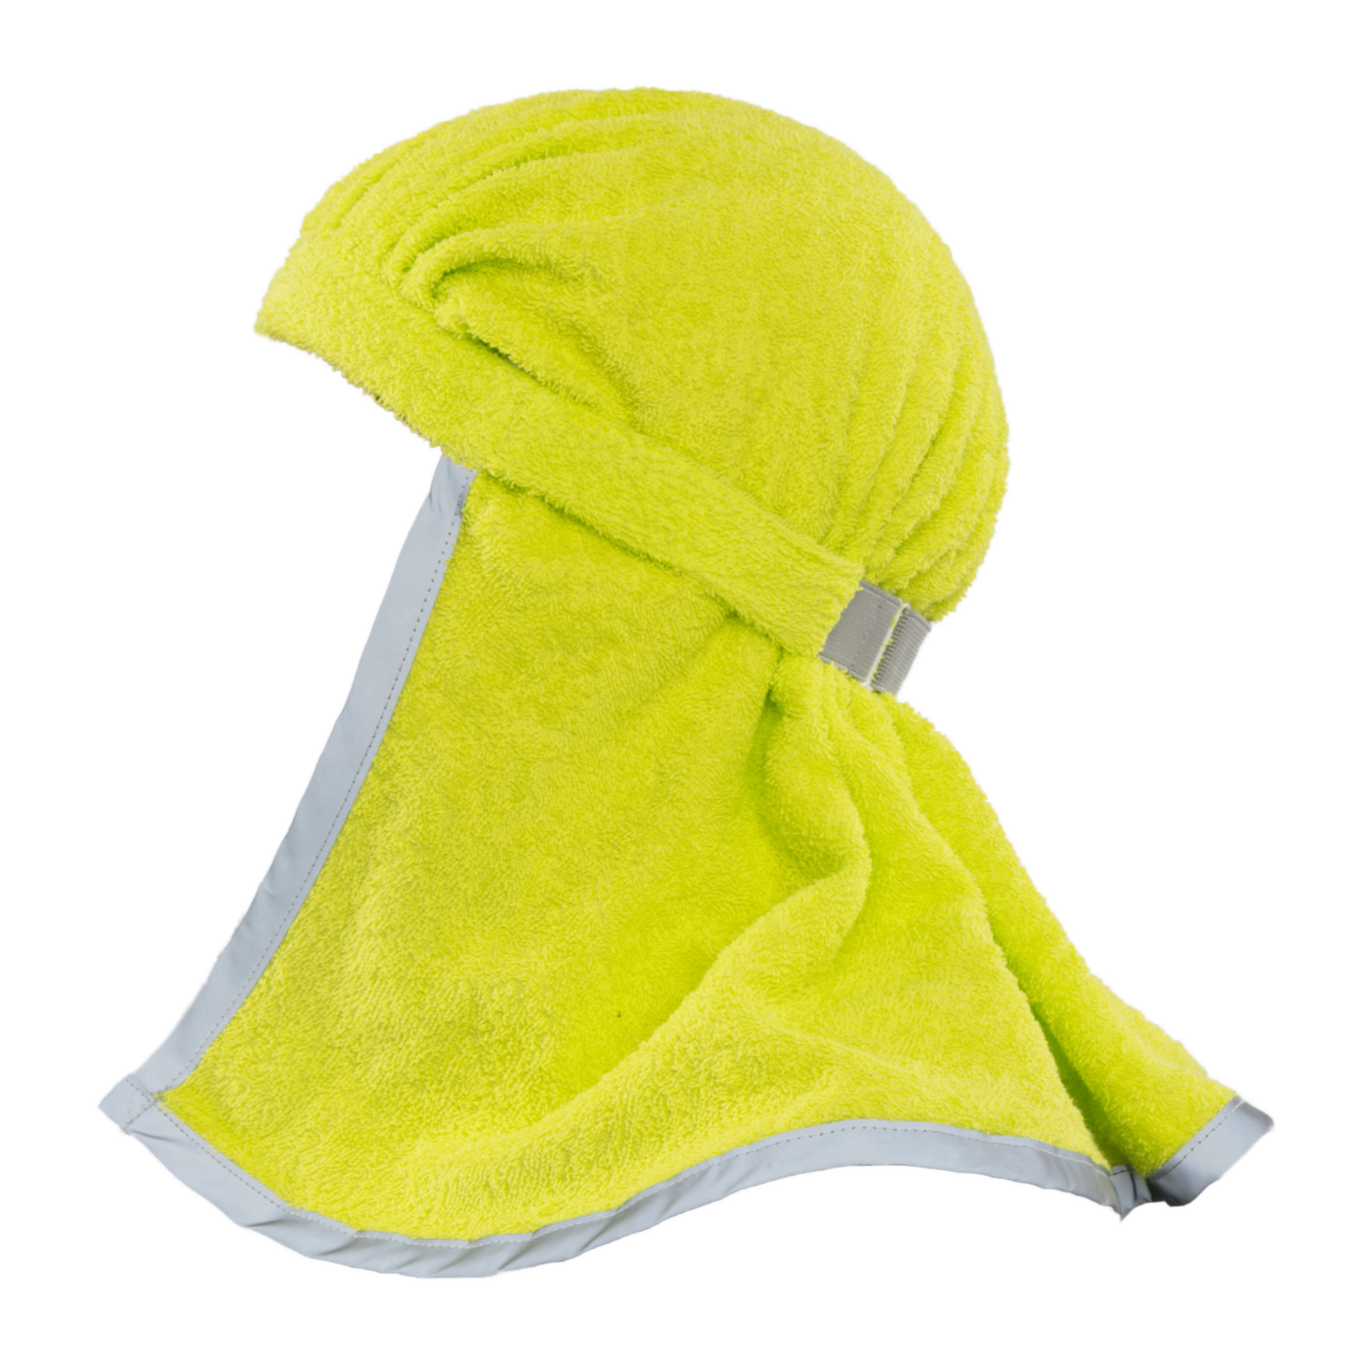 Polarheads PRO 3-in-1 Neck Shade, Sweatband and Cooling Towel